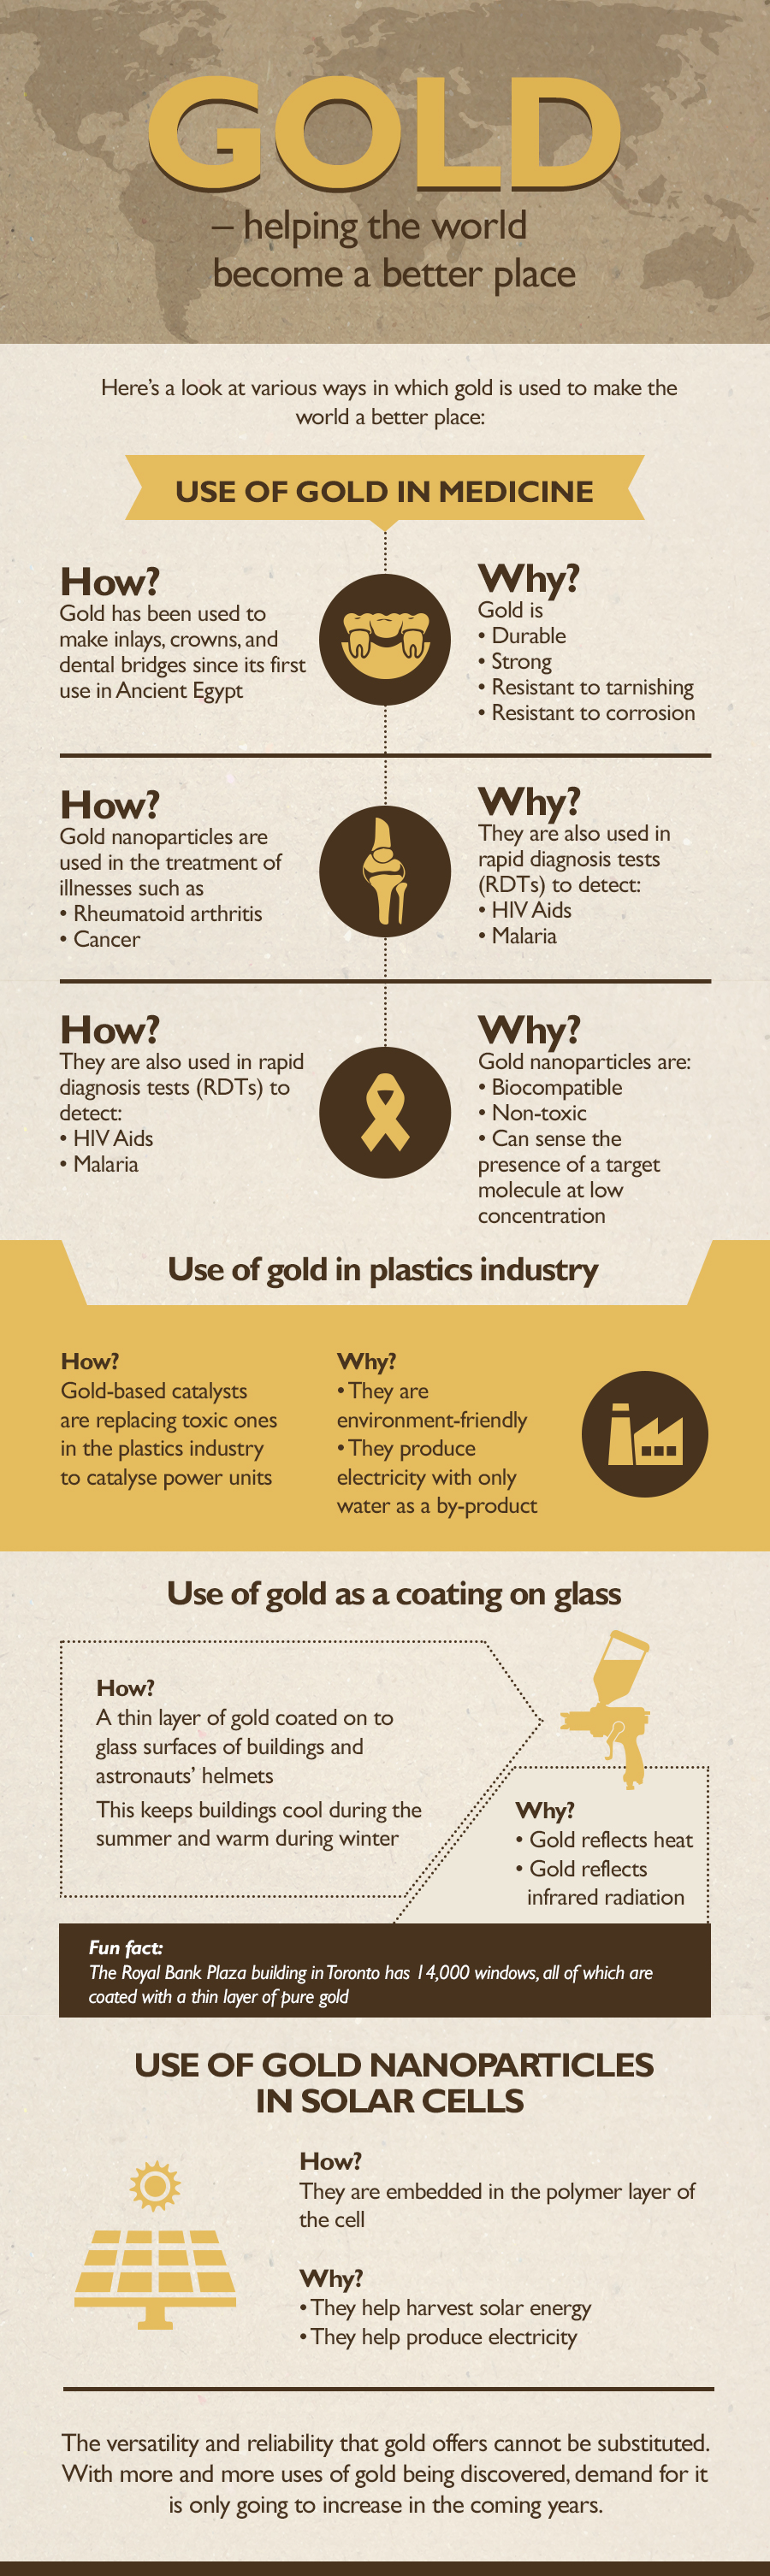 Know how gold is used to make the world a better place | My Gold Guide